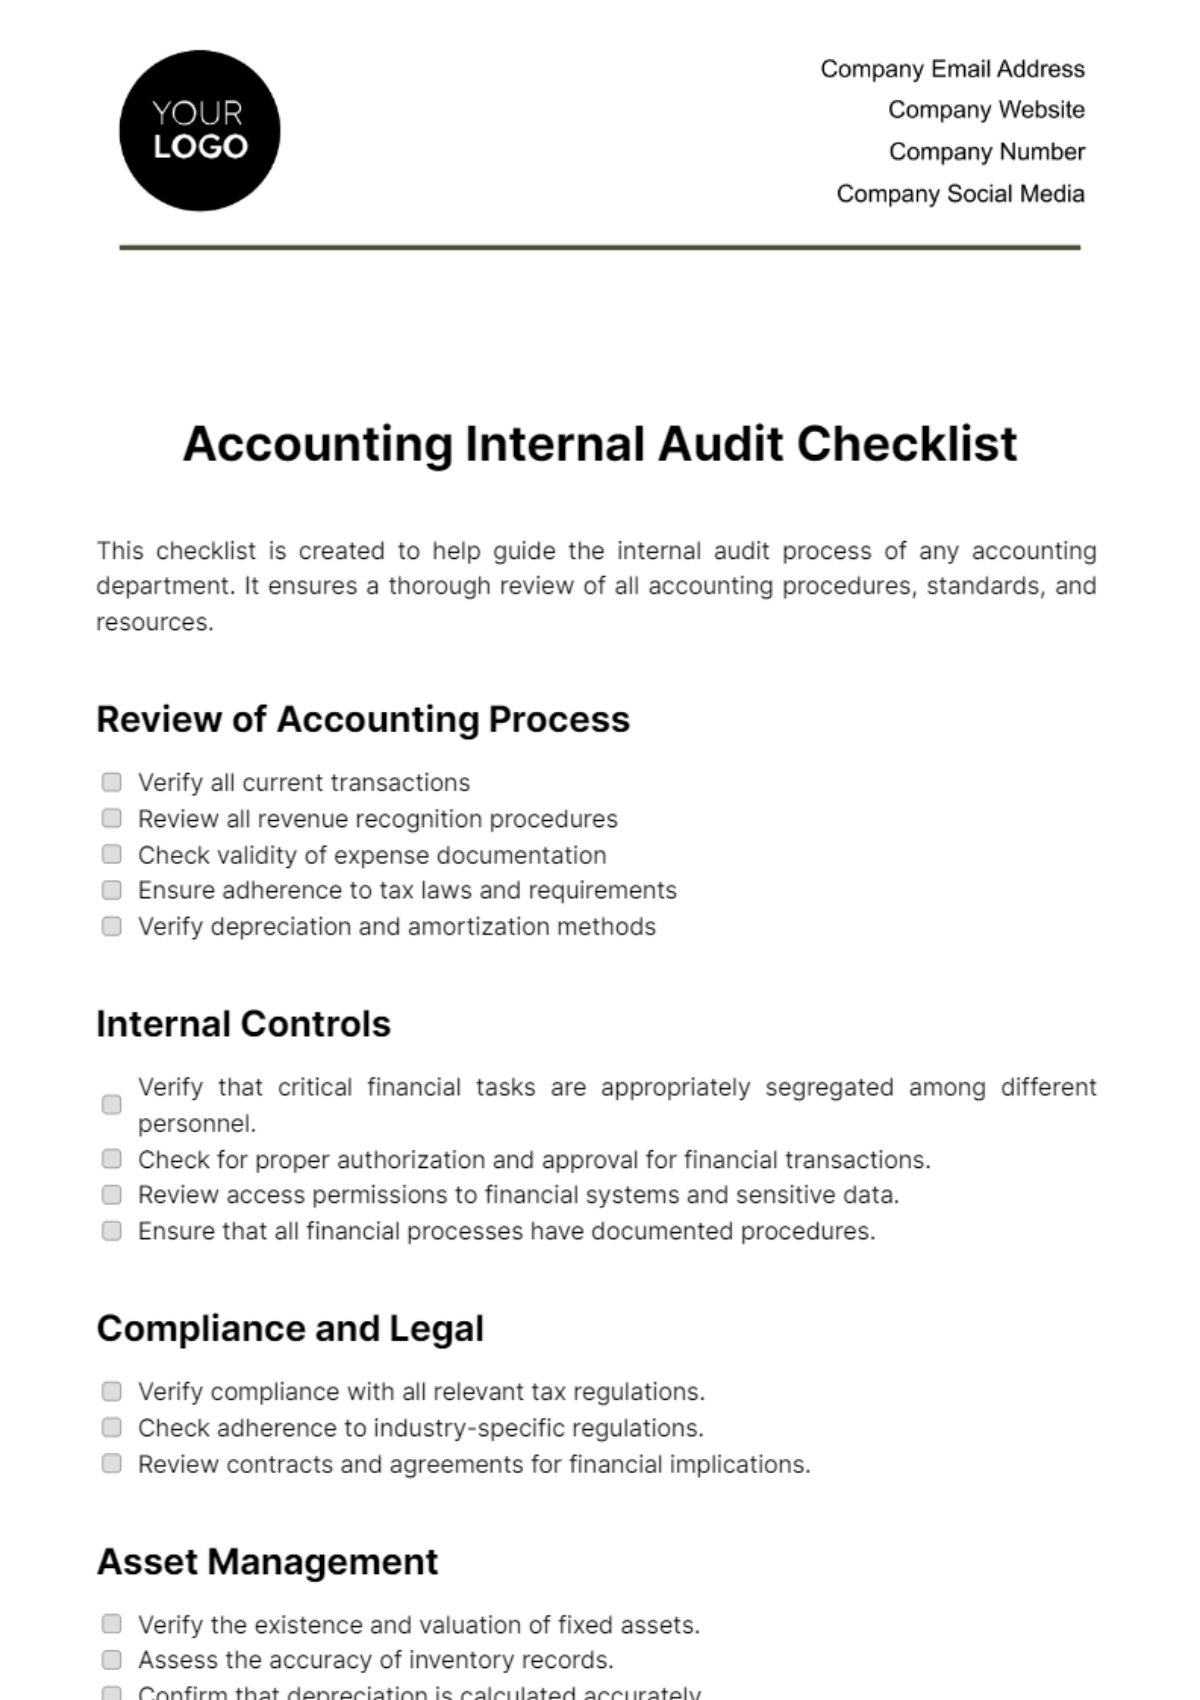 Accounting Internal Audit Checklist Template